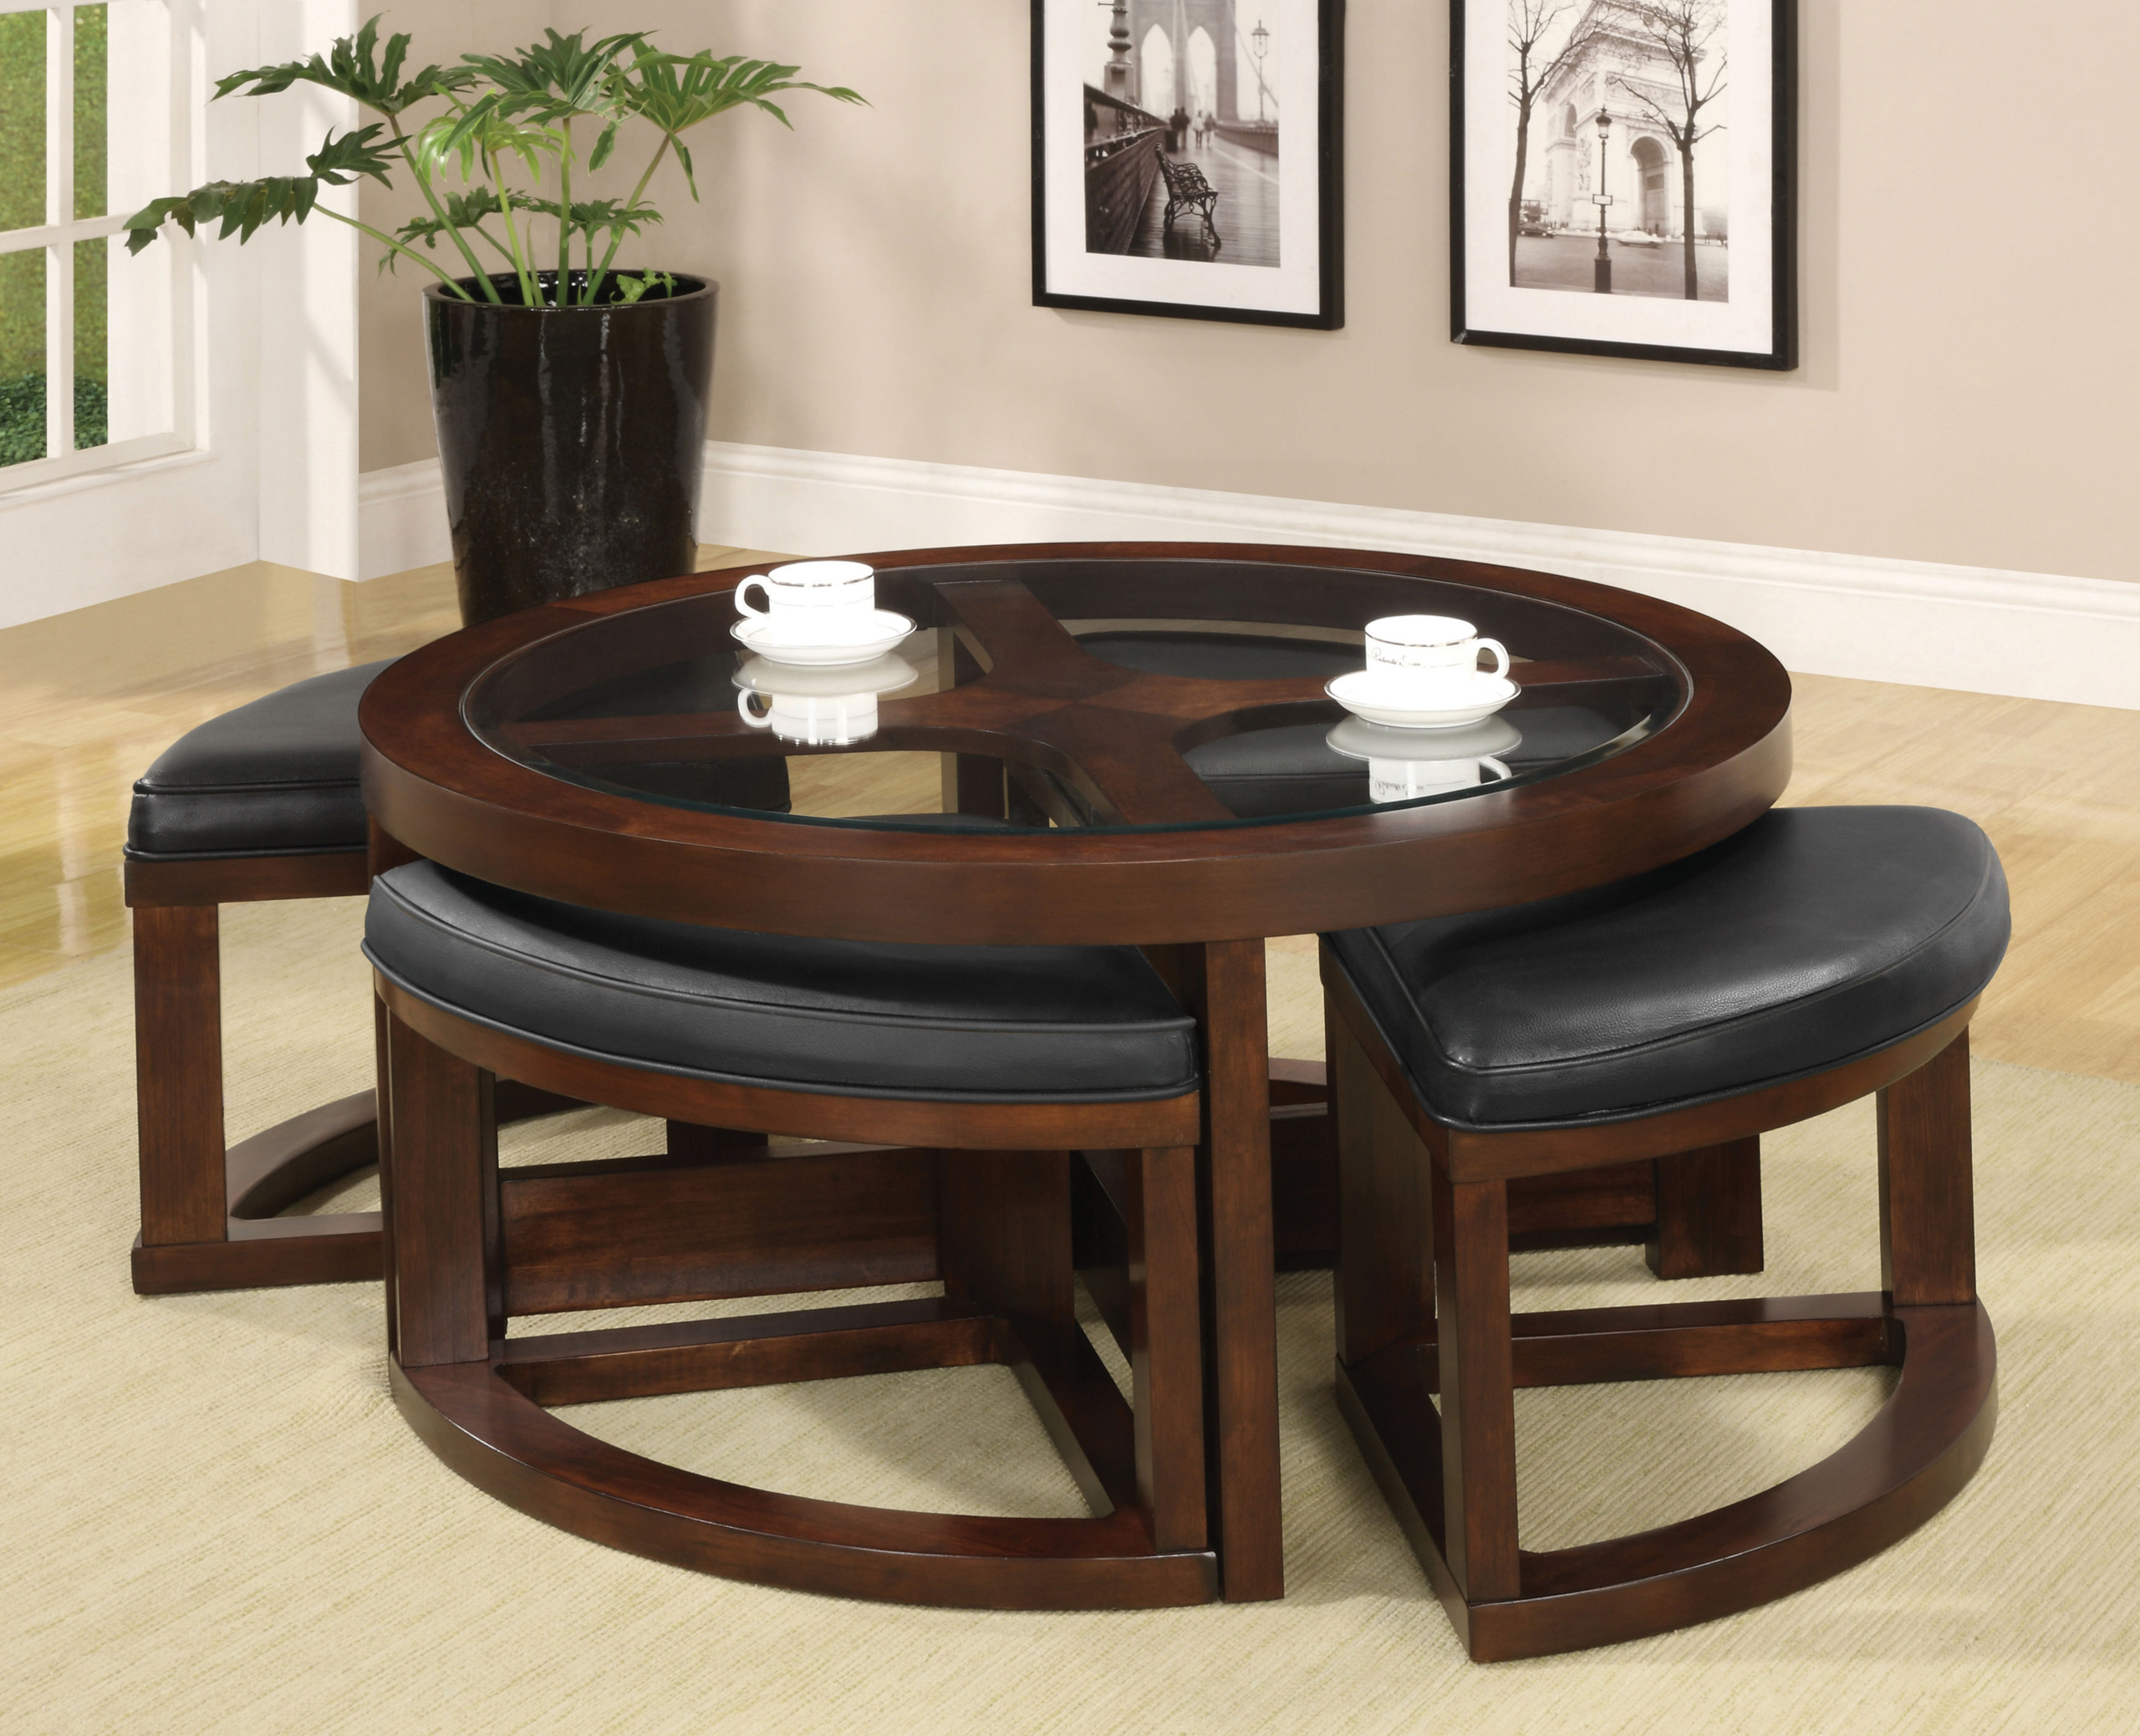 Coffee table with nesting ottomans 7